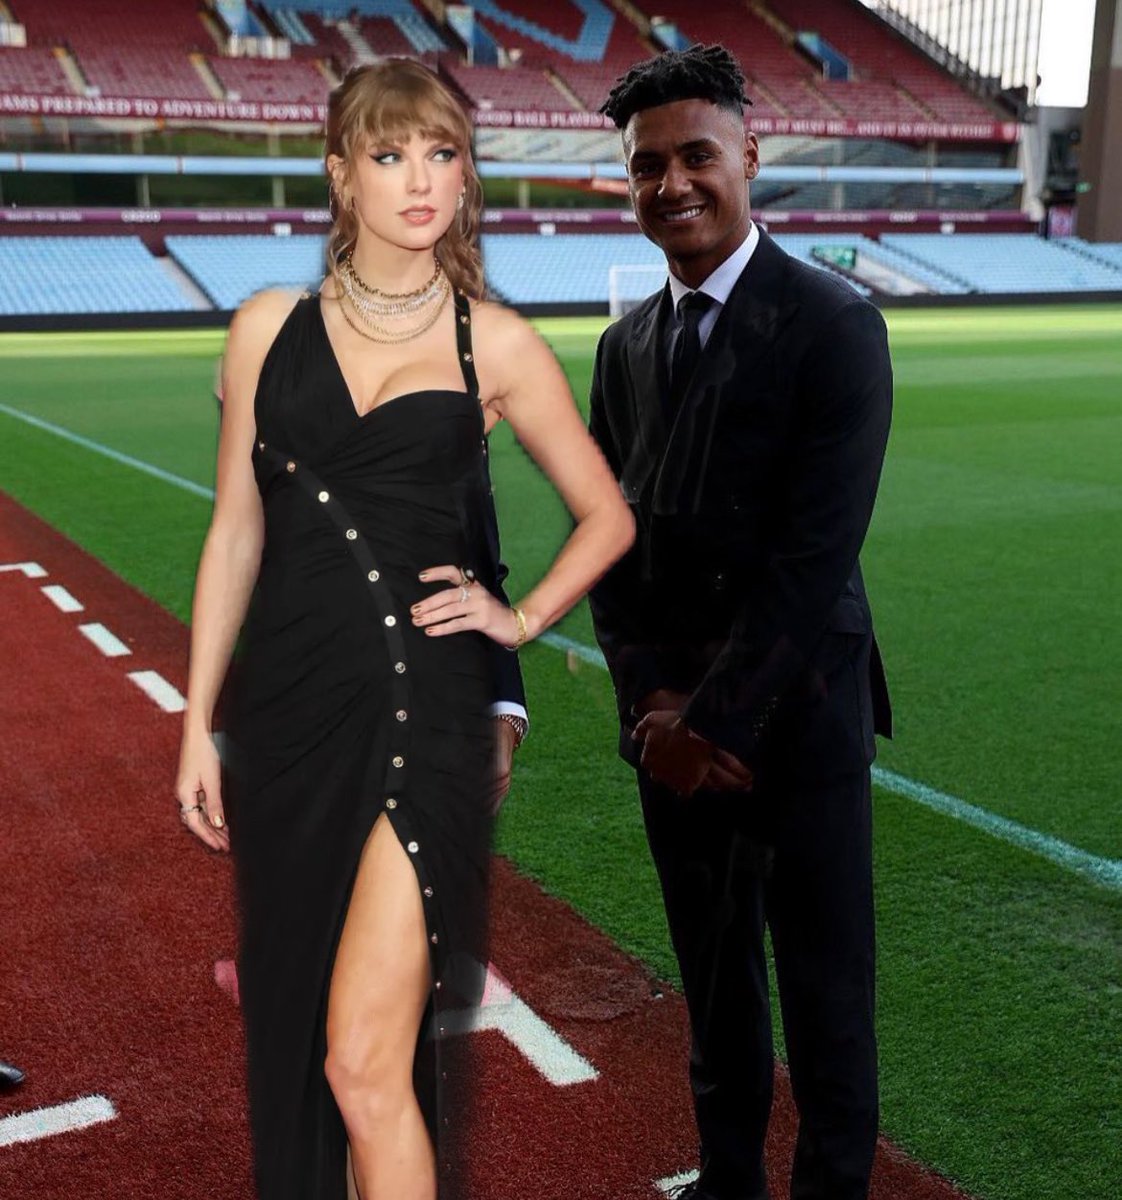 heeey swifties! 
ollie watkins: „i’m a huge swiftie, i listen to her new album #TTPD every morning!” 
what a player, huge taylor swift fan! he has been nominated for the @premierleague player of the season award, please vote for him in the link below💜